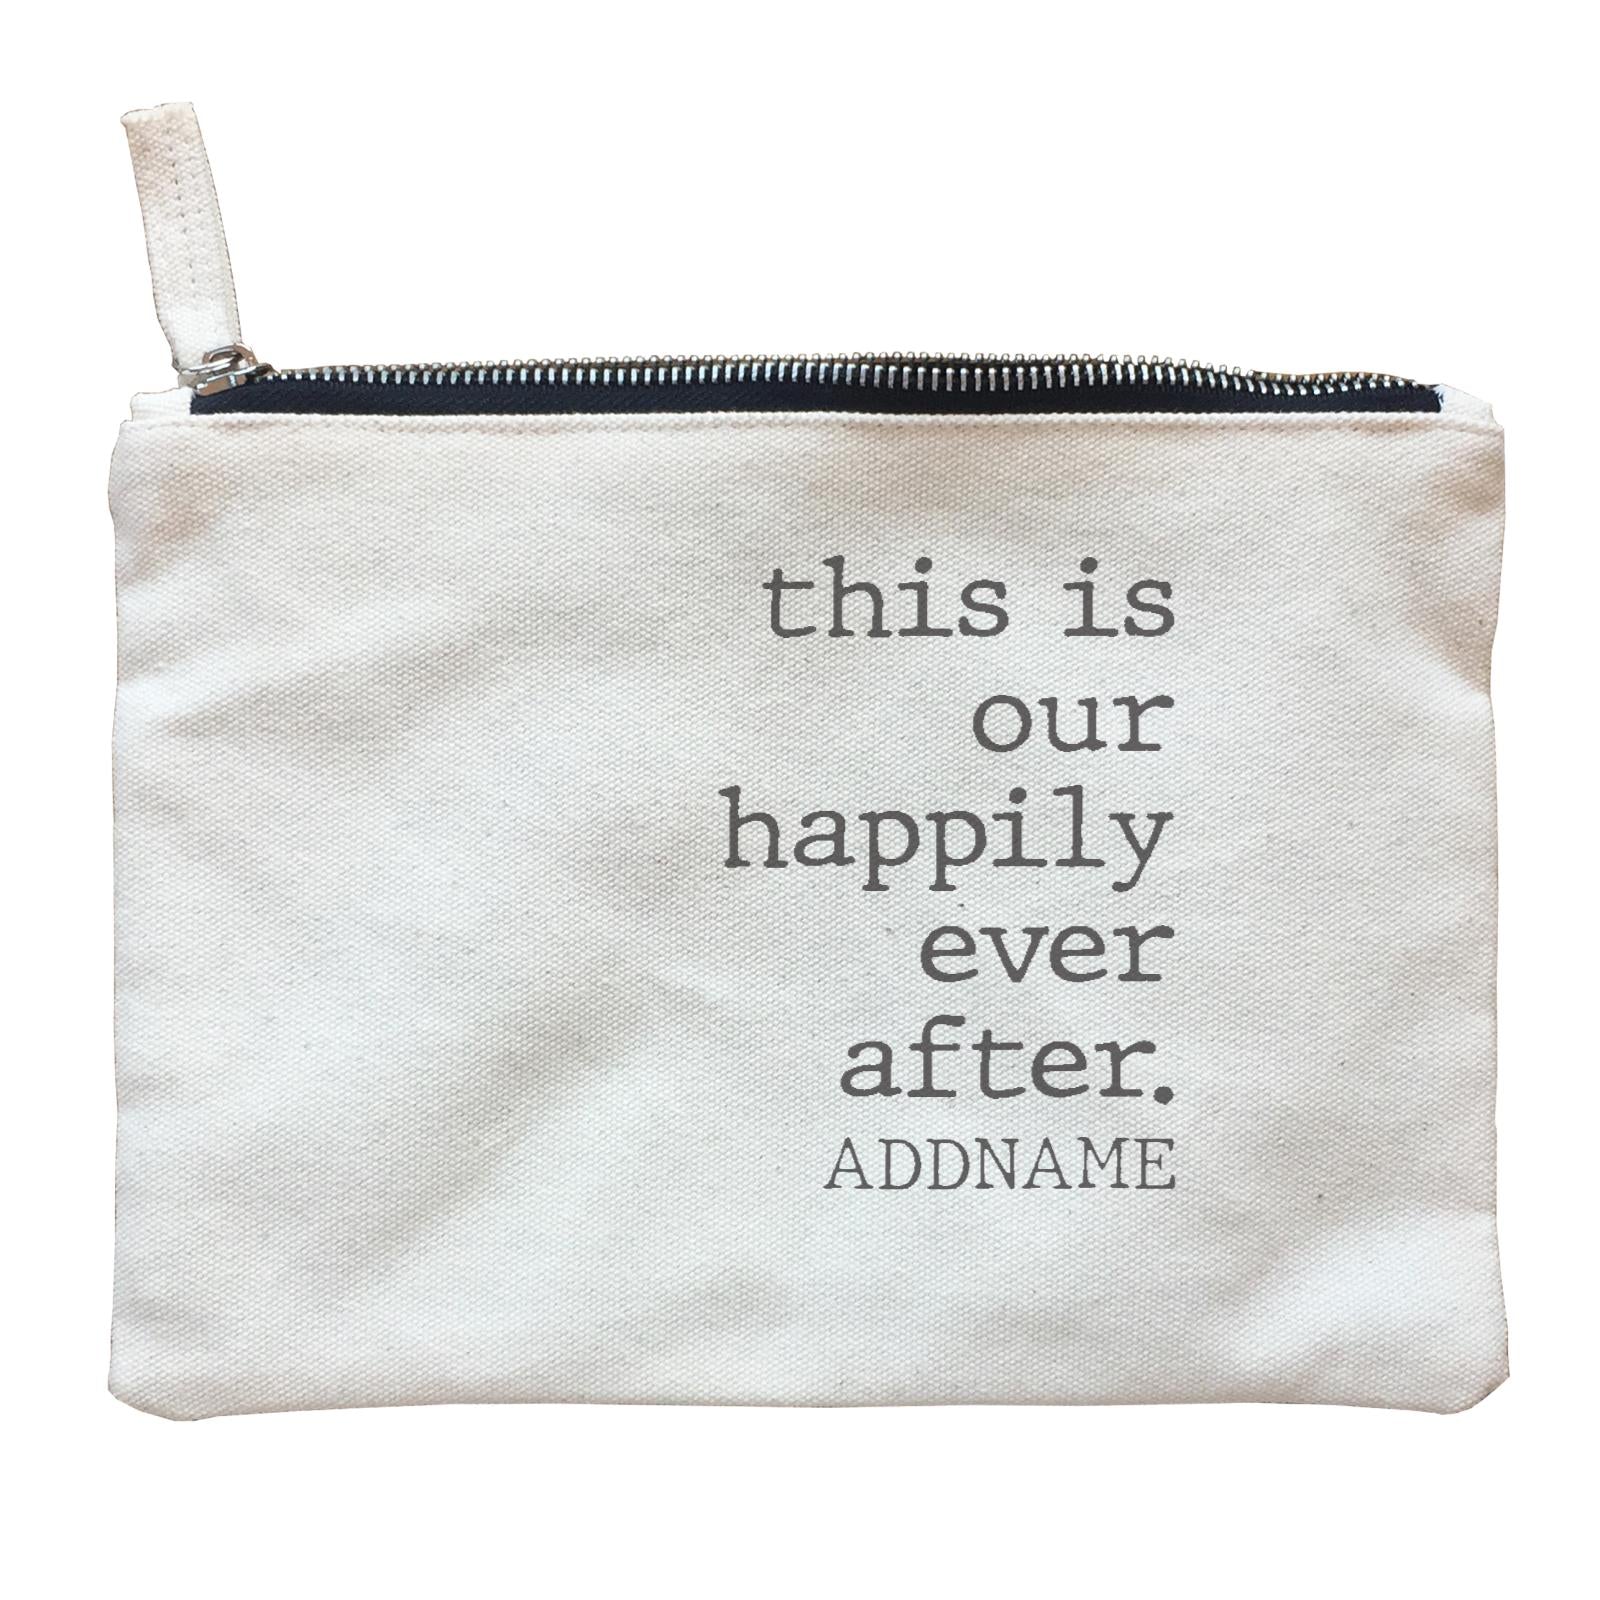 Family Is Everythings Quotes This Is Our Happily Ever After Addame Zipper Pouch